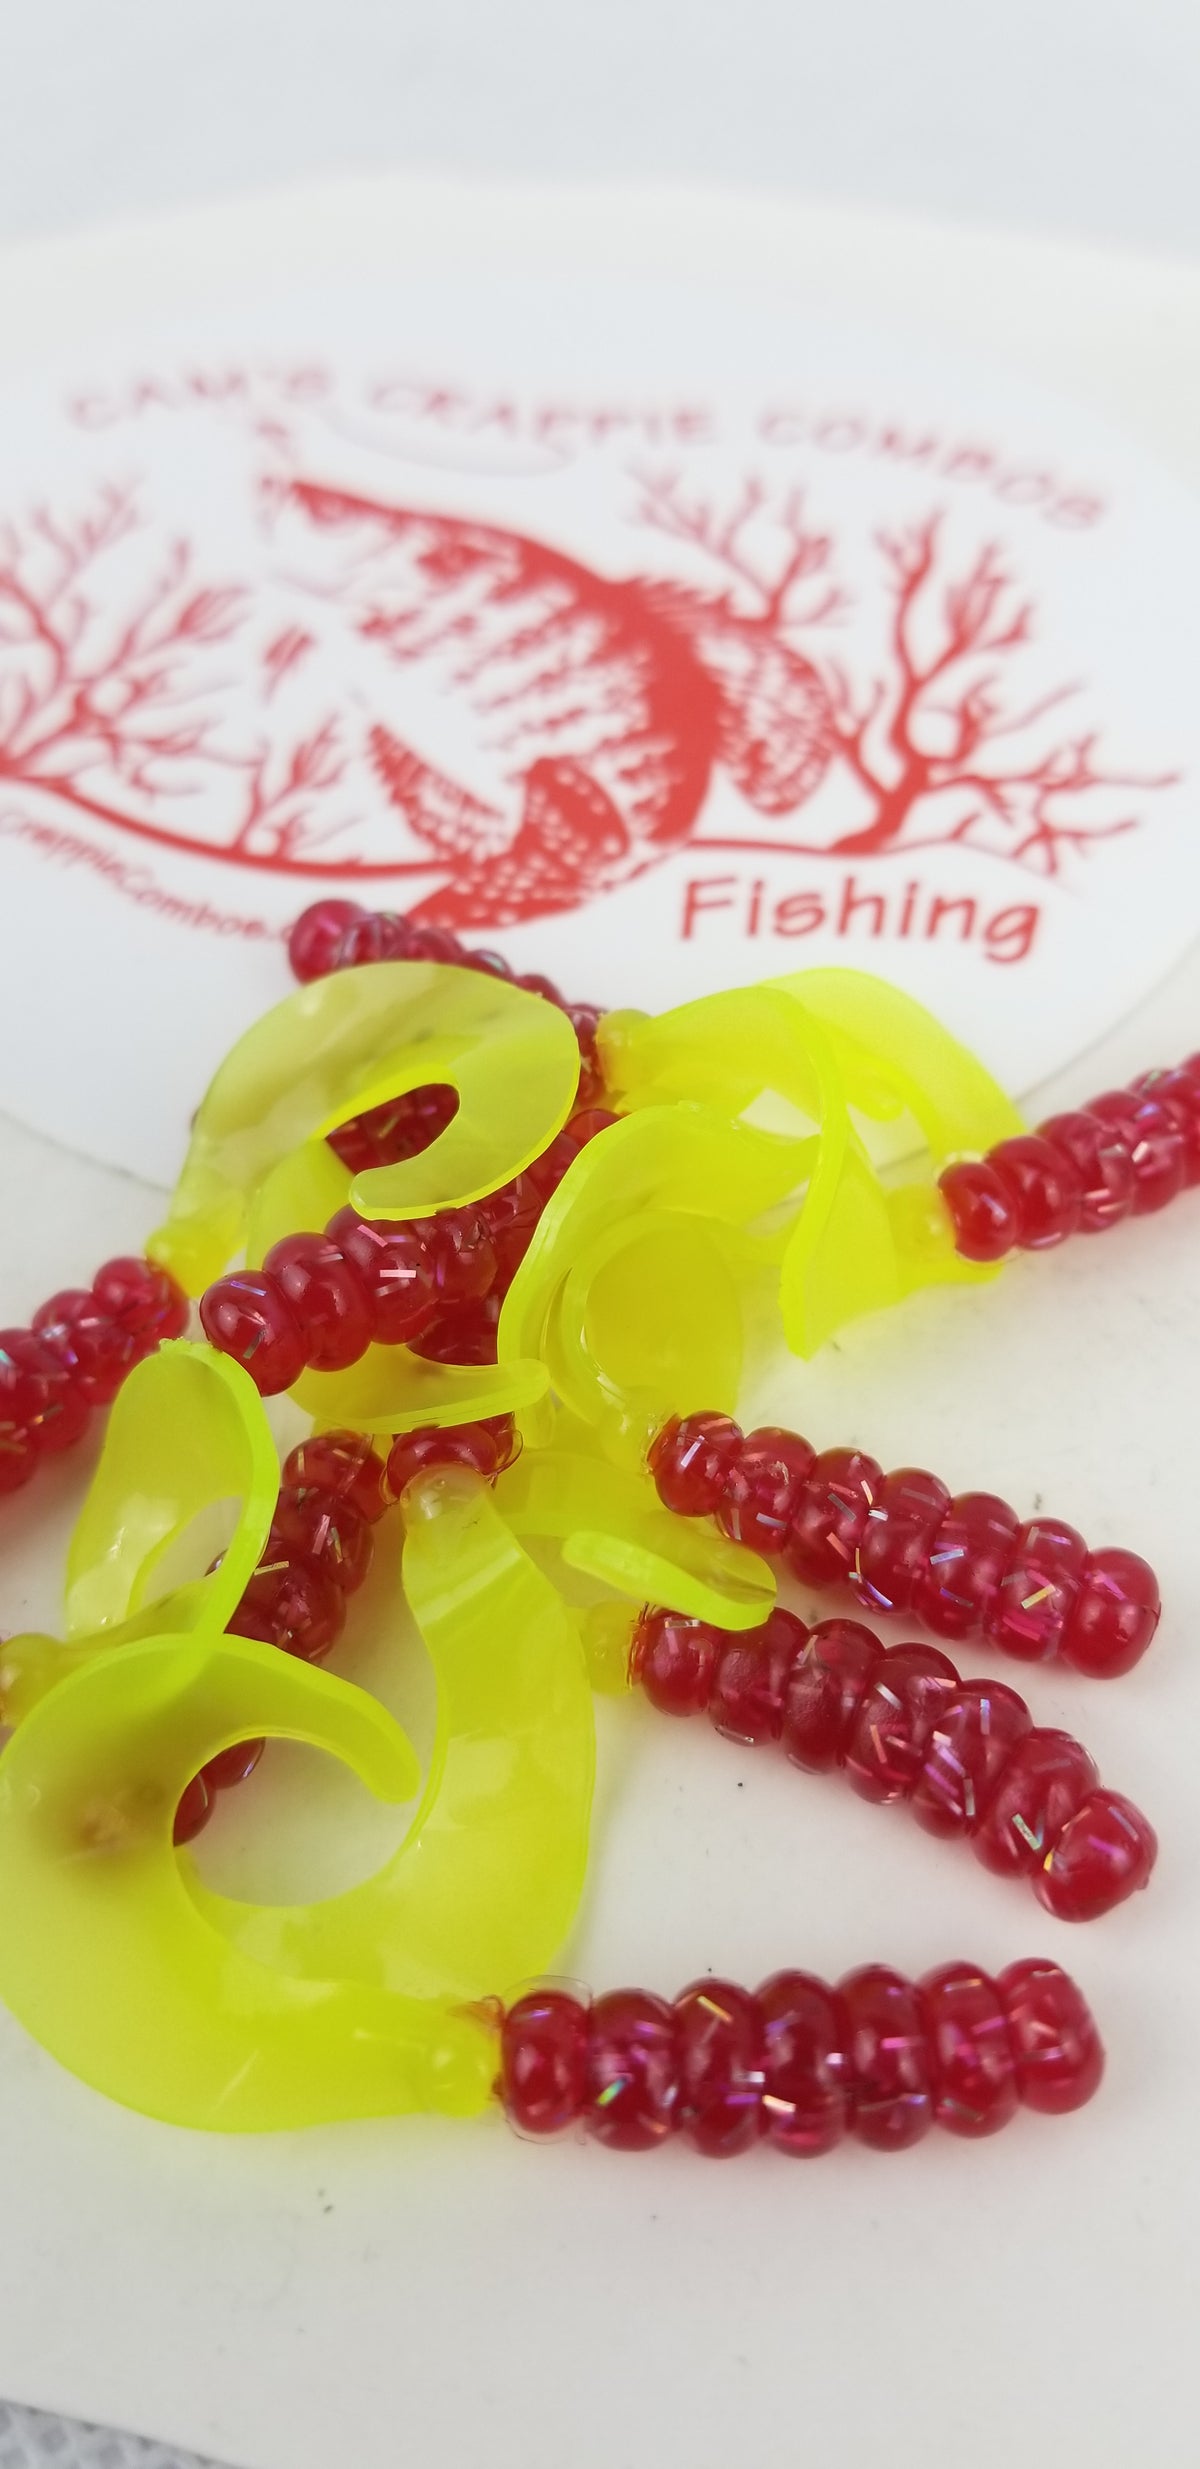 Cam's 2"(HOLOGRAM FLAKE) RED FIREBALL 100pc  Curly Tail Crappie Soft Jigs  [A Cam's Exclusive]